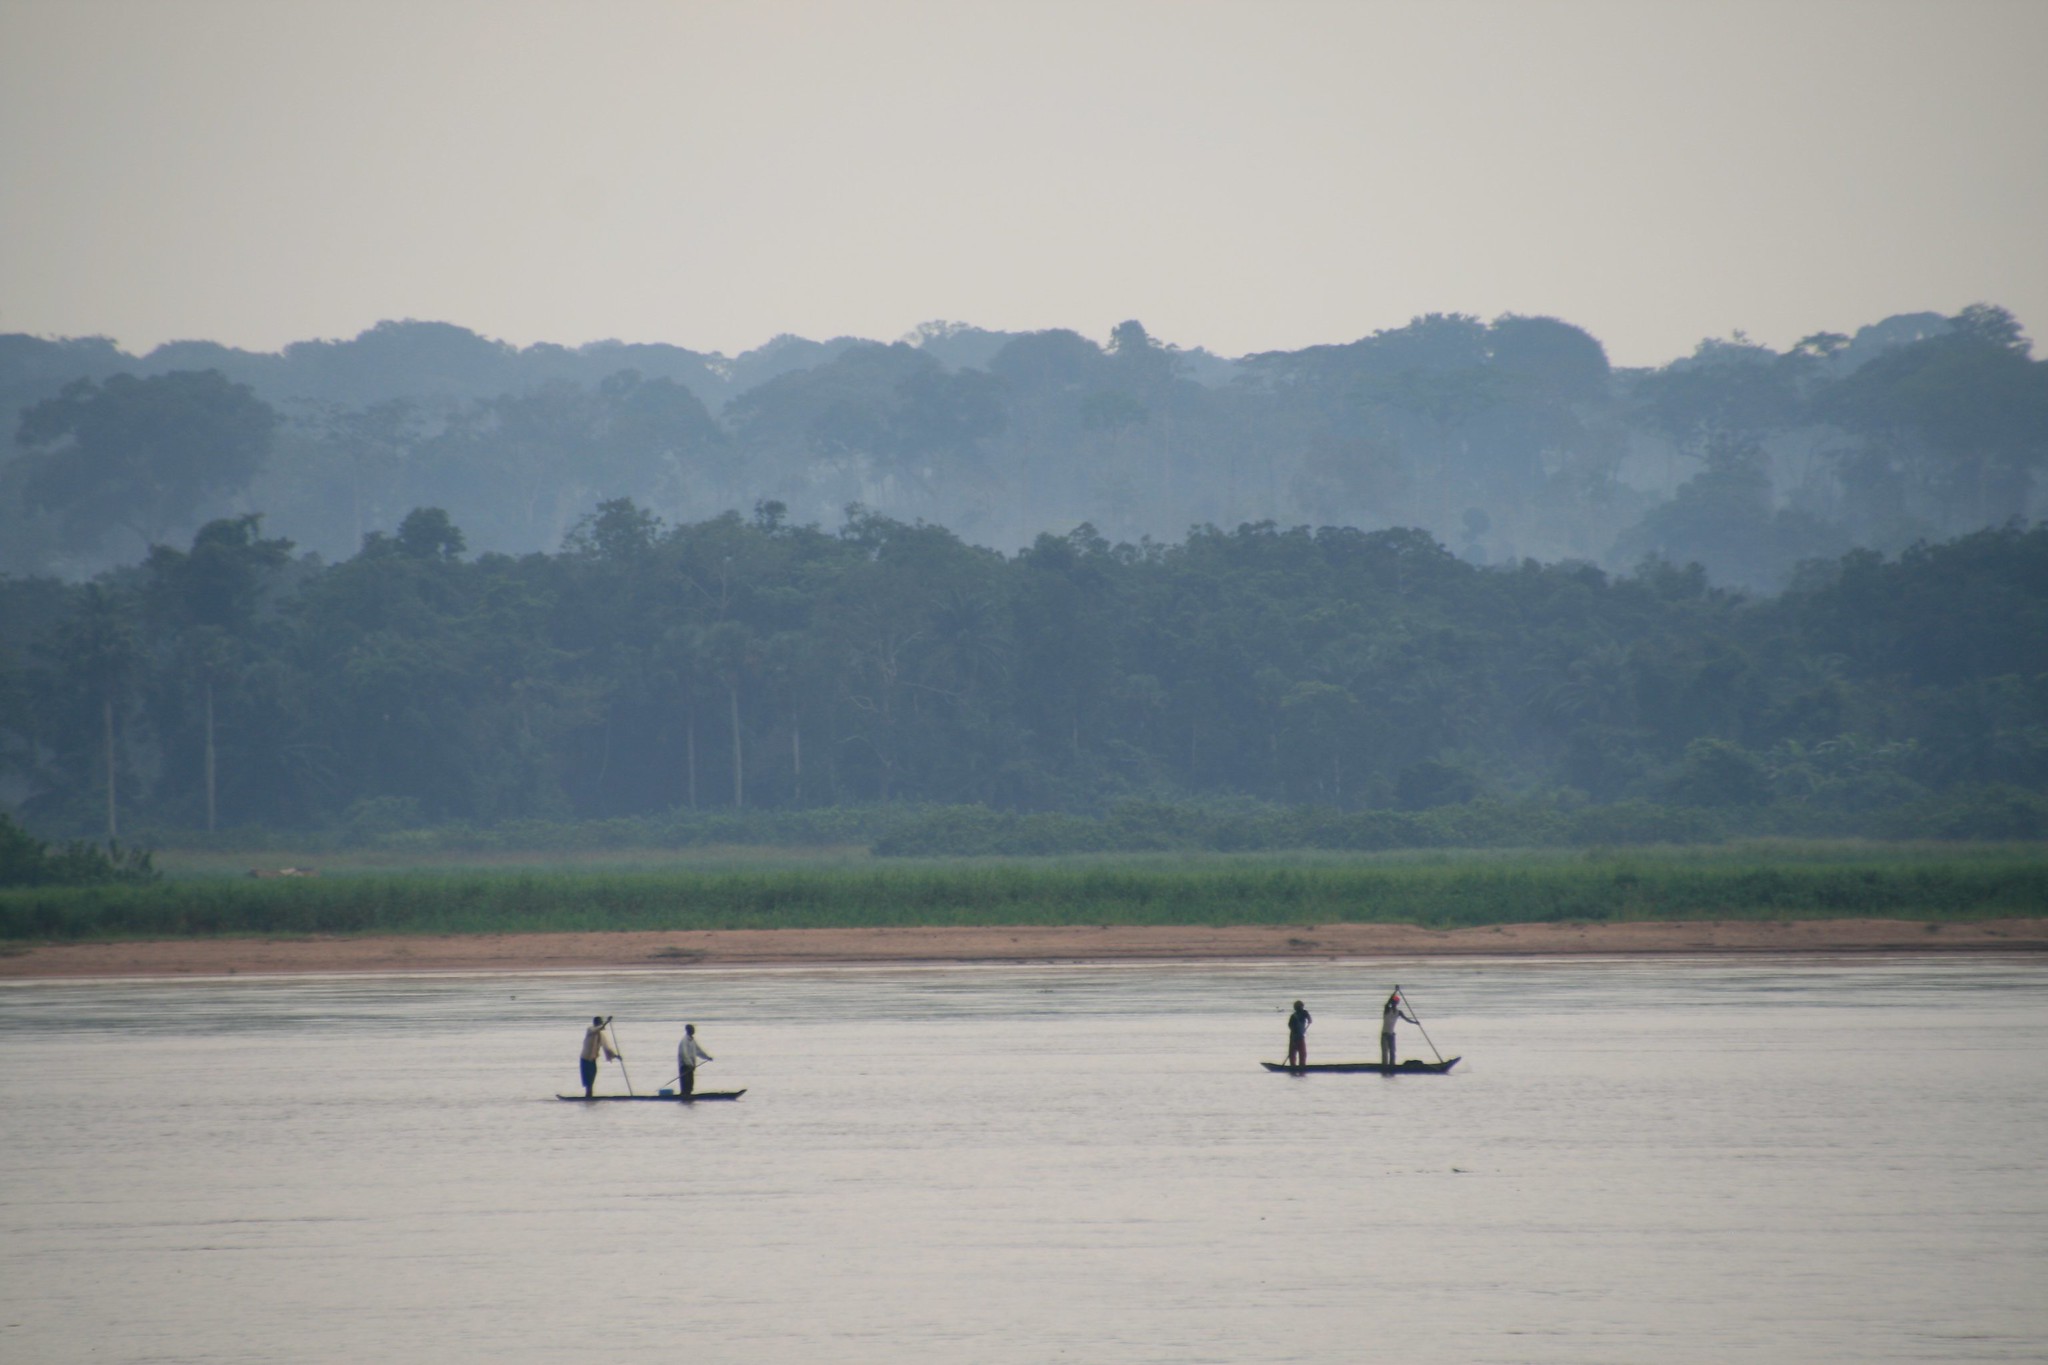 Pirogues on the Kasai River with forests on the far bank. Image by Terese Hart via Flickr.